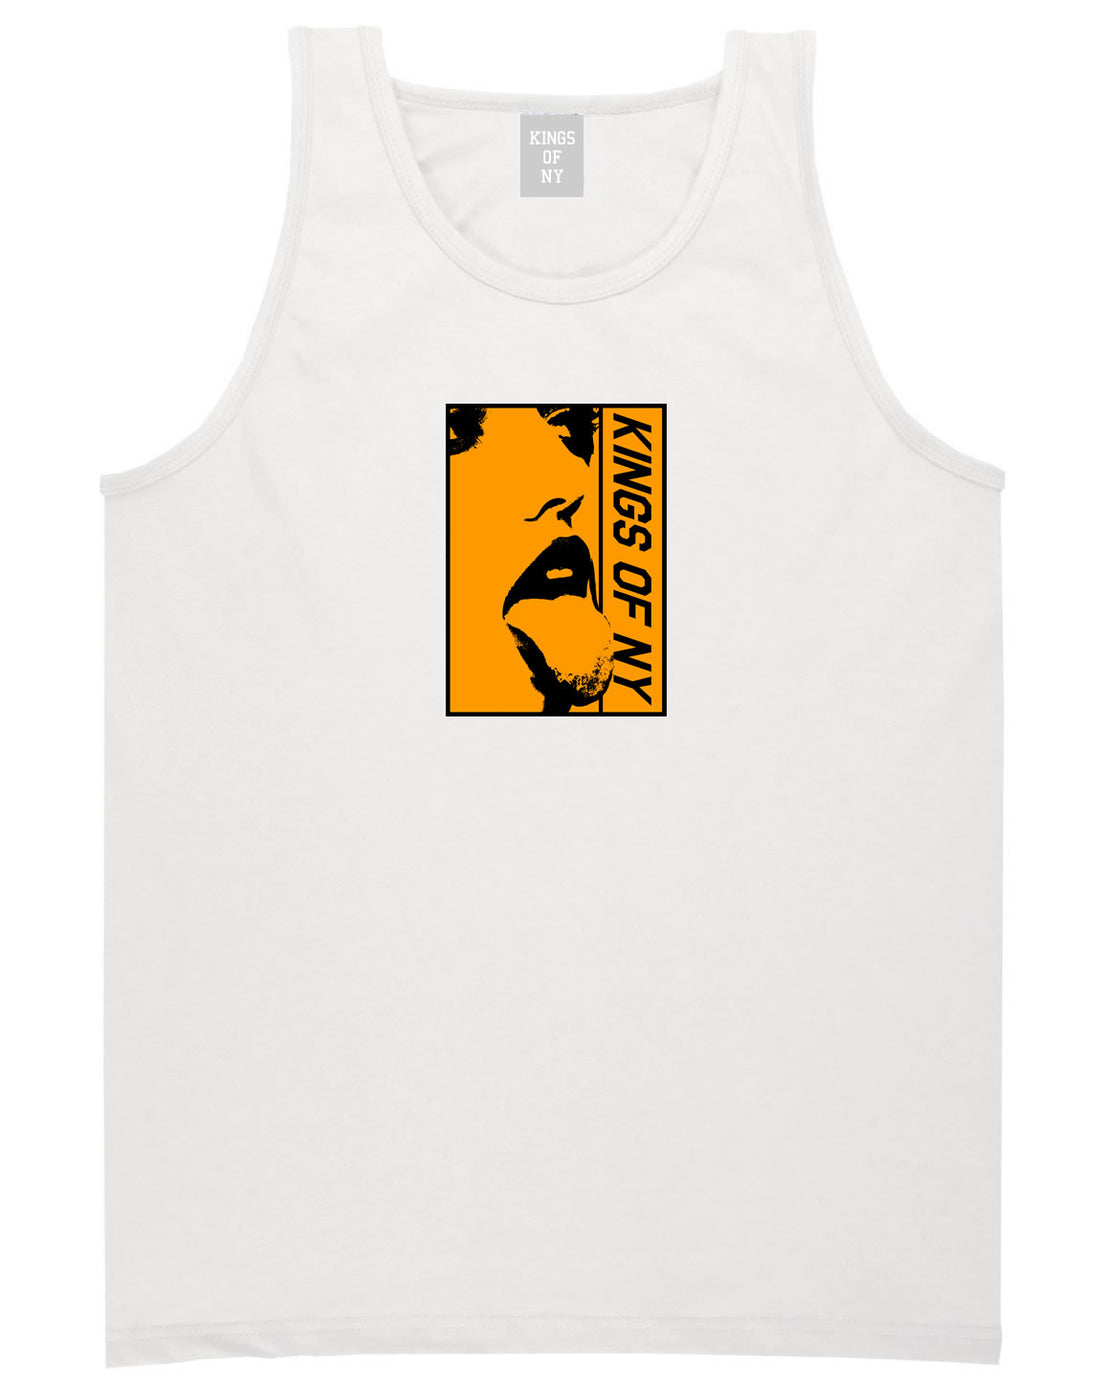 Open Minded Mens Tank Top Shirt White